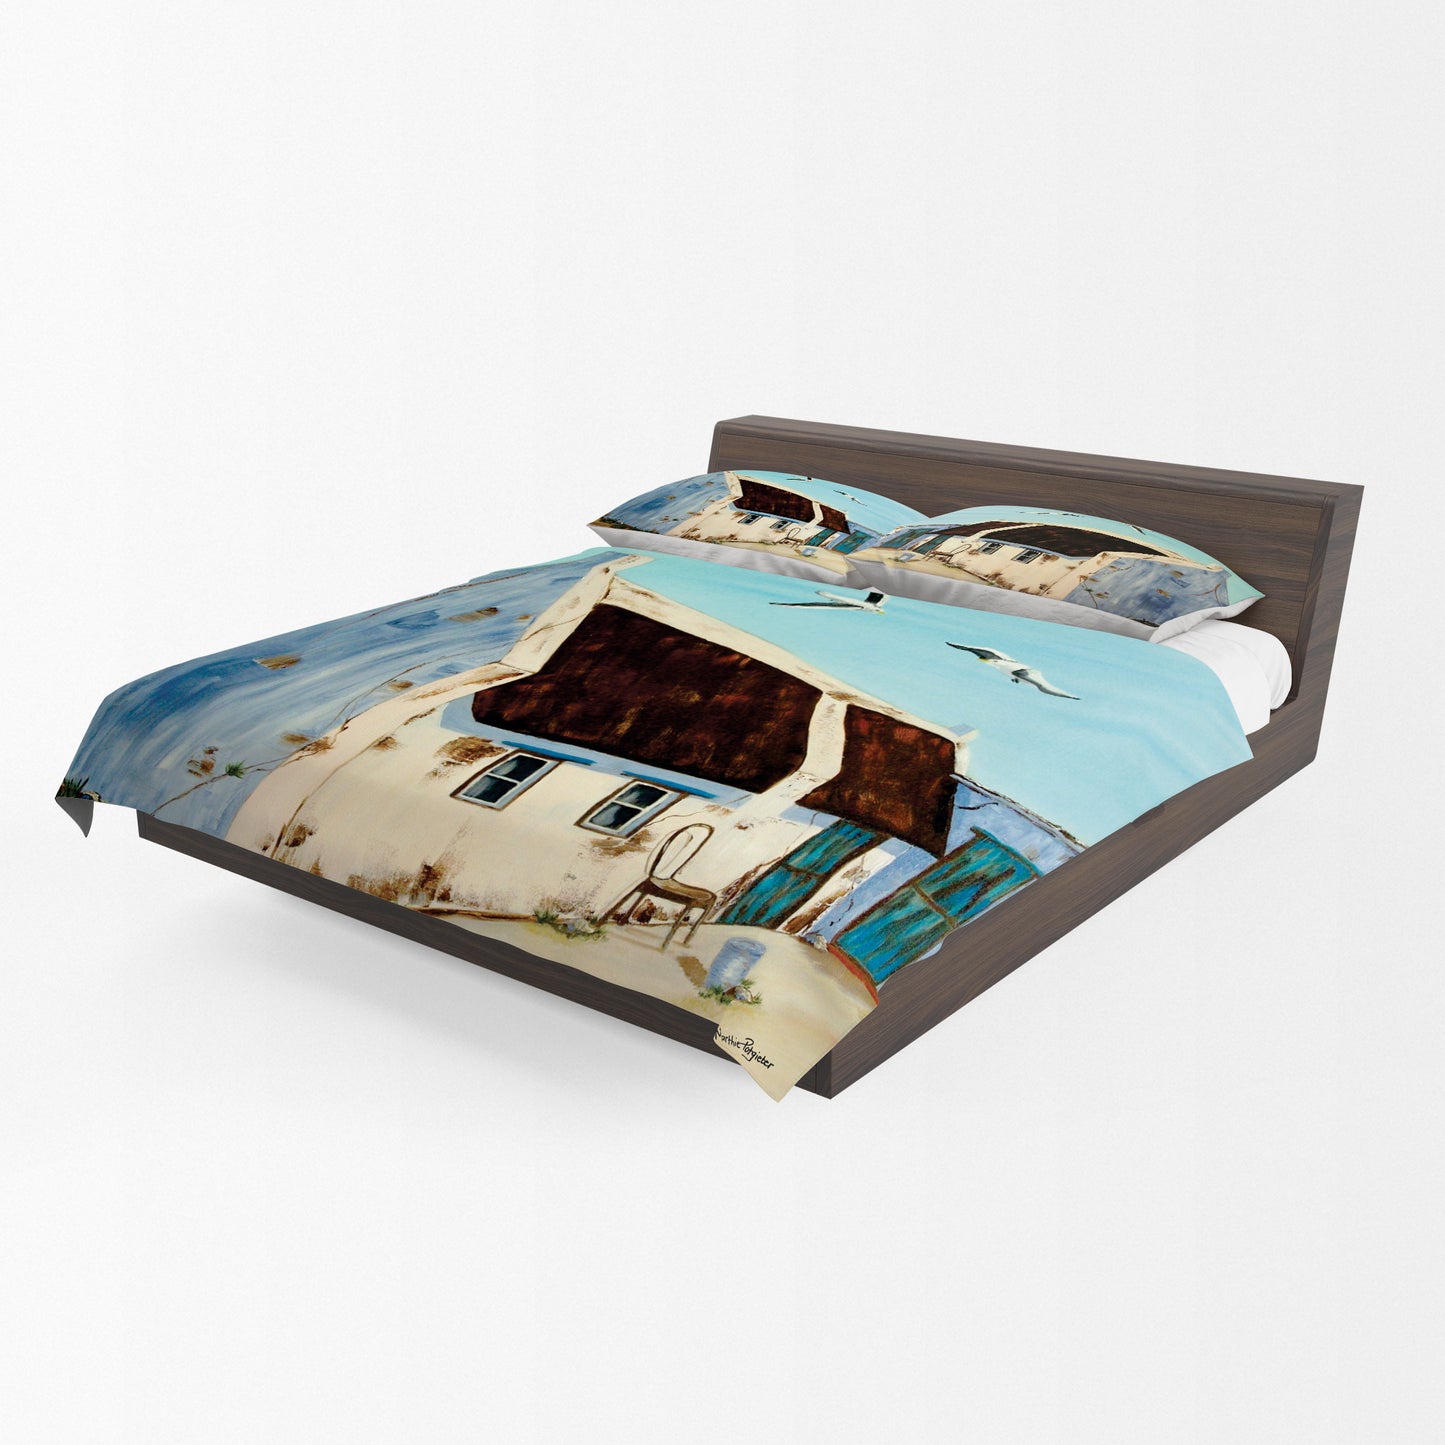 Seagulls Home Duvet Cover Set By Marthie Potgieter